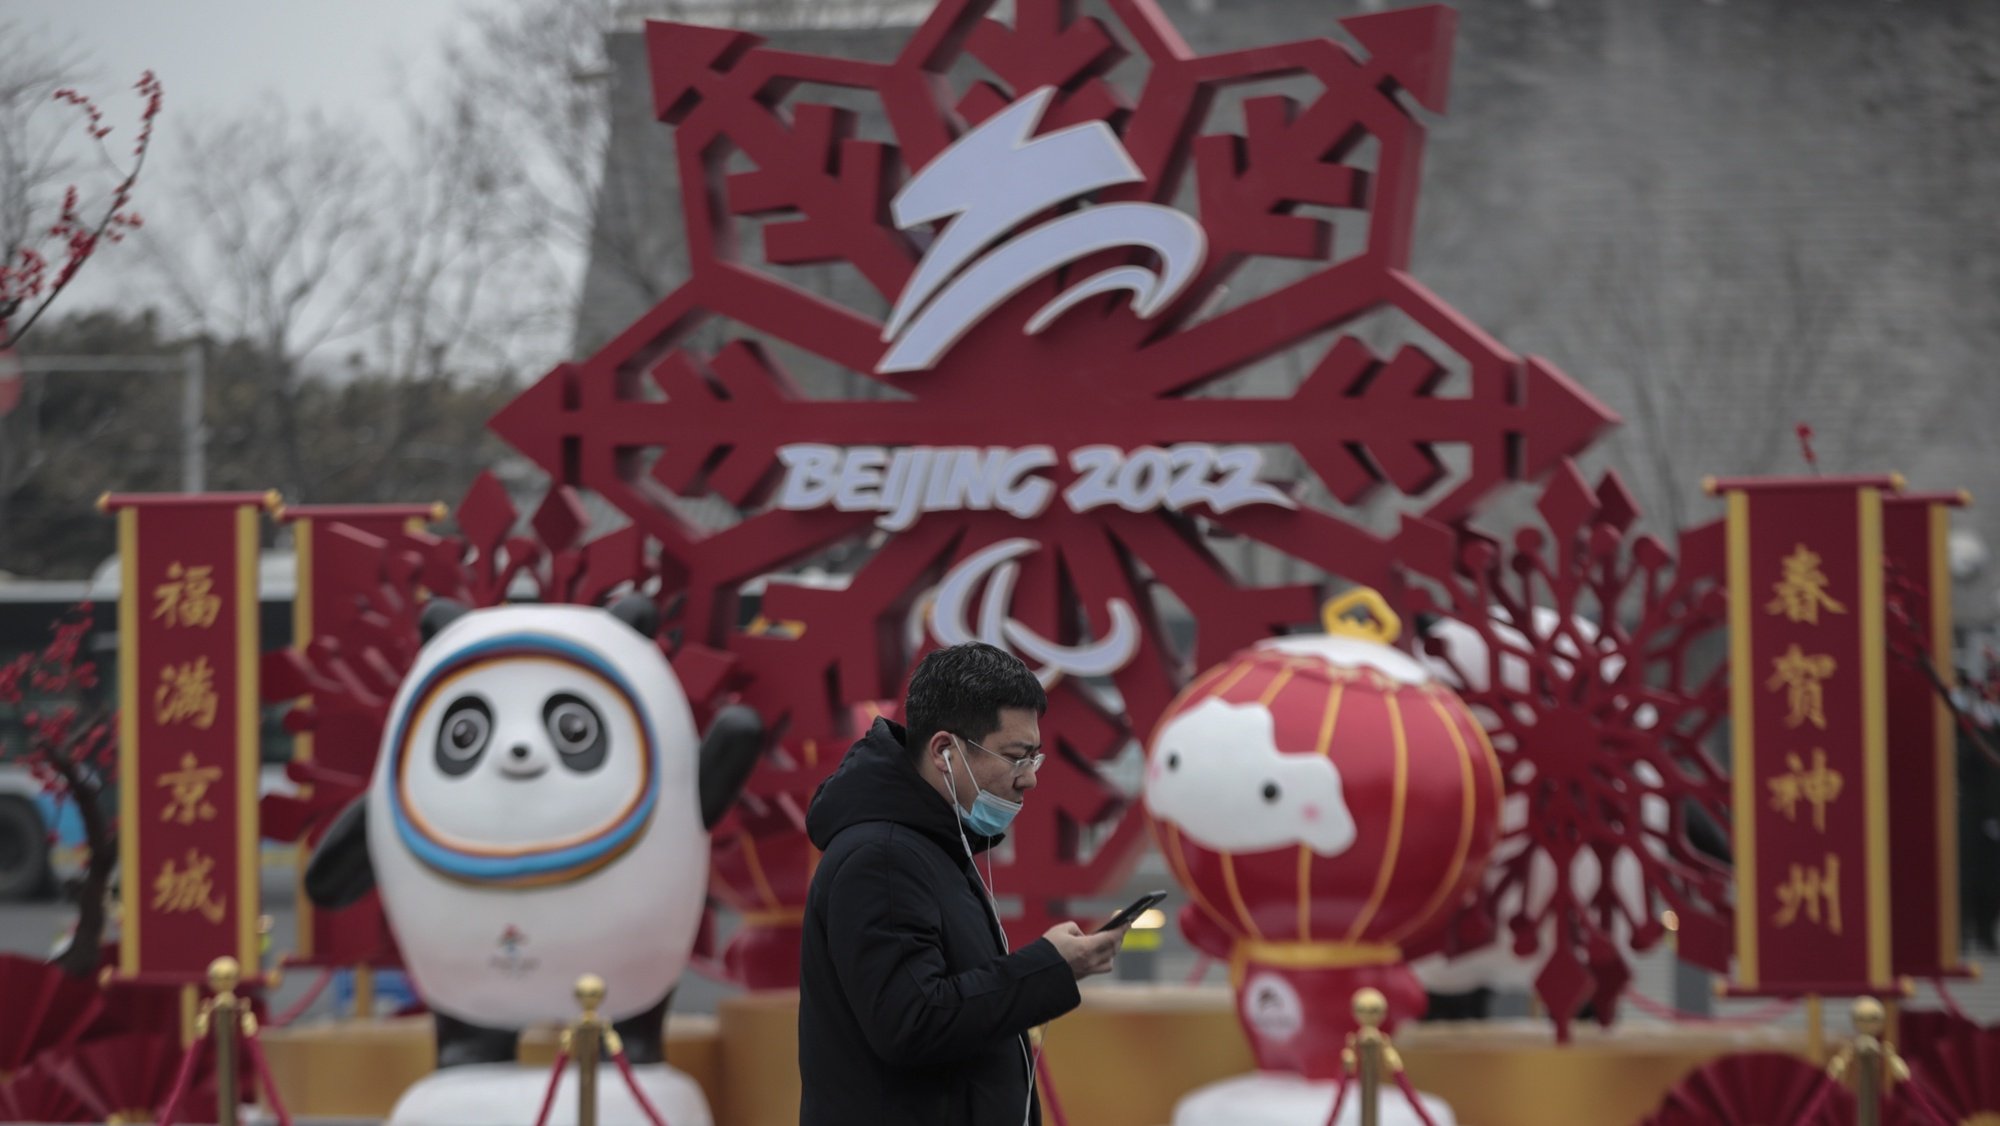 epa09705931 A man wearing face mask walks pass the Bing Dwen Dwen, the Beijing 2022 Winter Olympic Mascot and Shuey Rhon Rhon, the 2022 Beijing Winter Paralympic Games Mascot, in Beijing, China, 24 January 2022. China is scheduled to host the Beijing 2022 Olympic and Paralympic Winter Games in February, making its capital the first city in the world to host both Summer (2008) and Winter Olympics (2022).  EPA/WU HONG